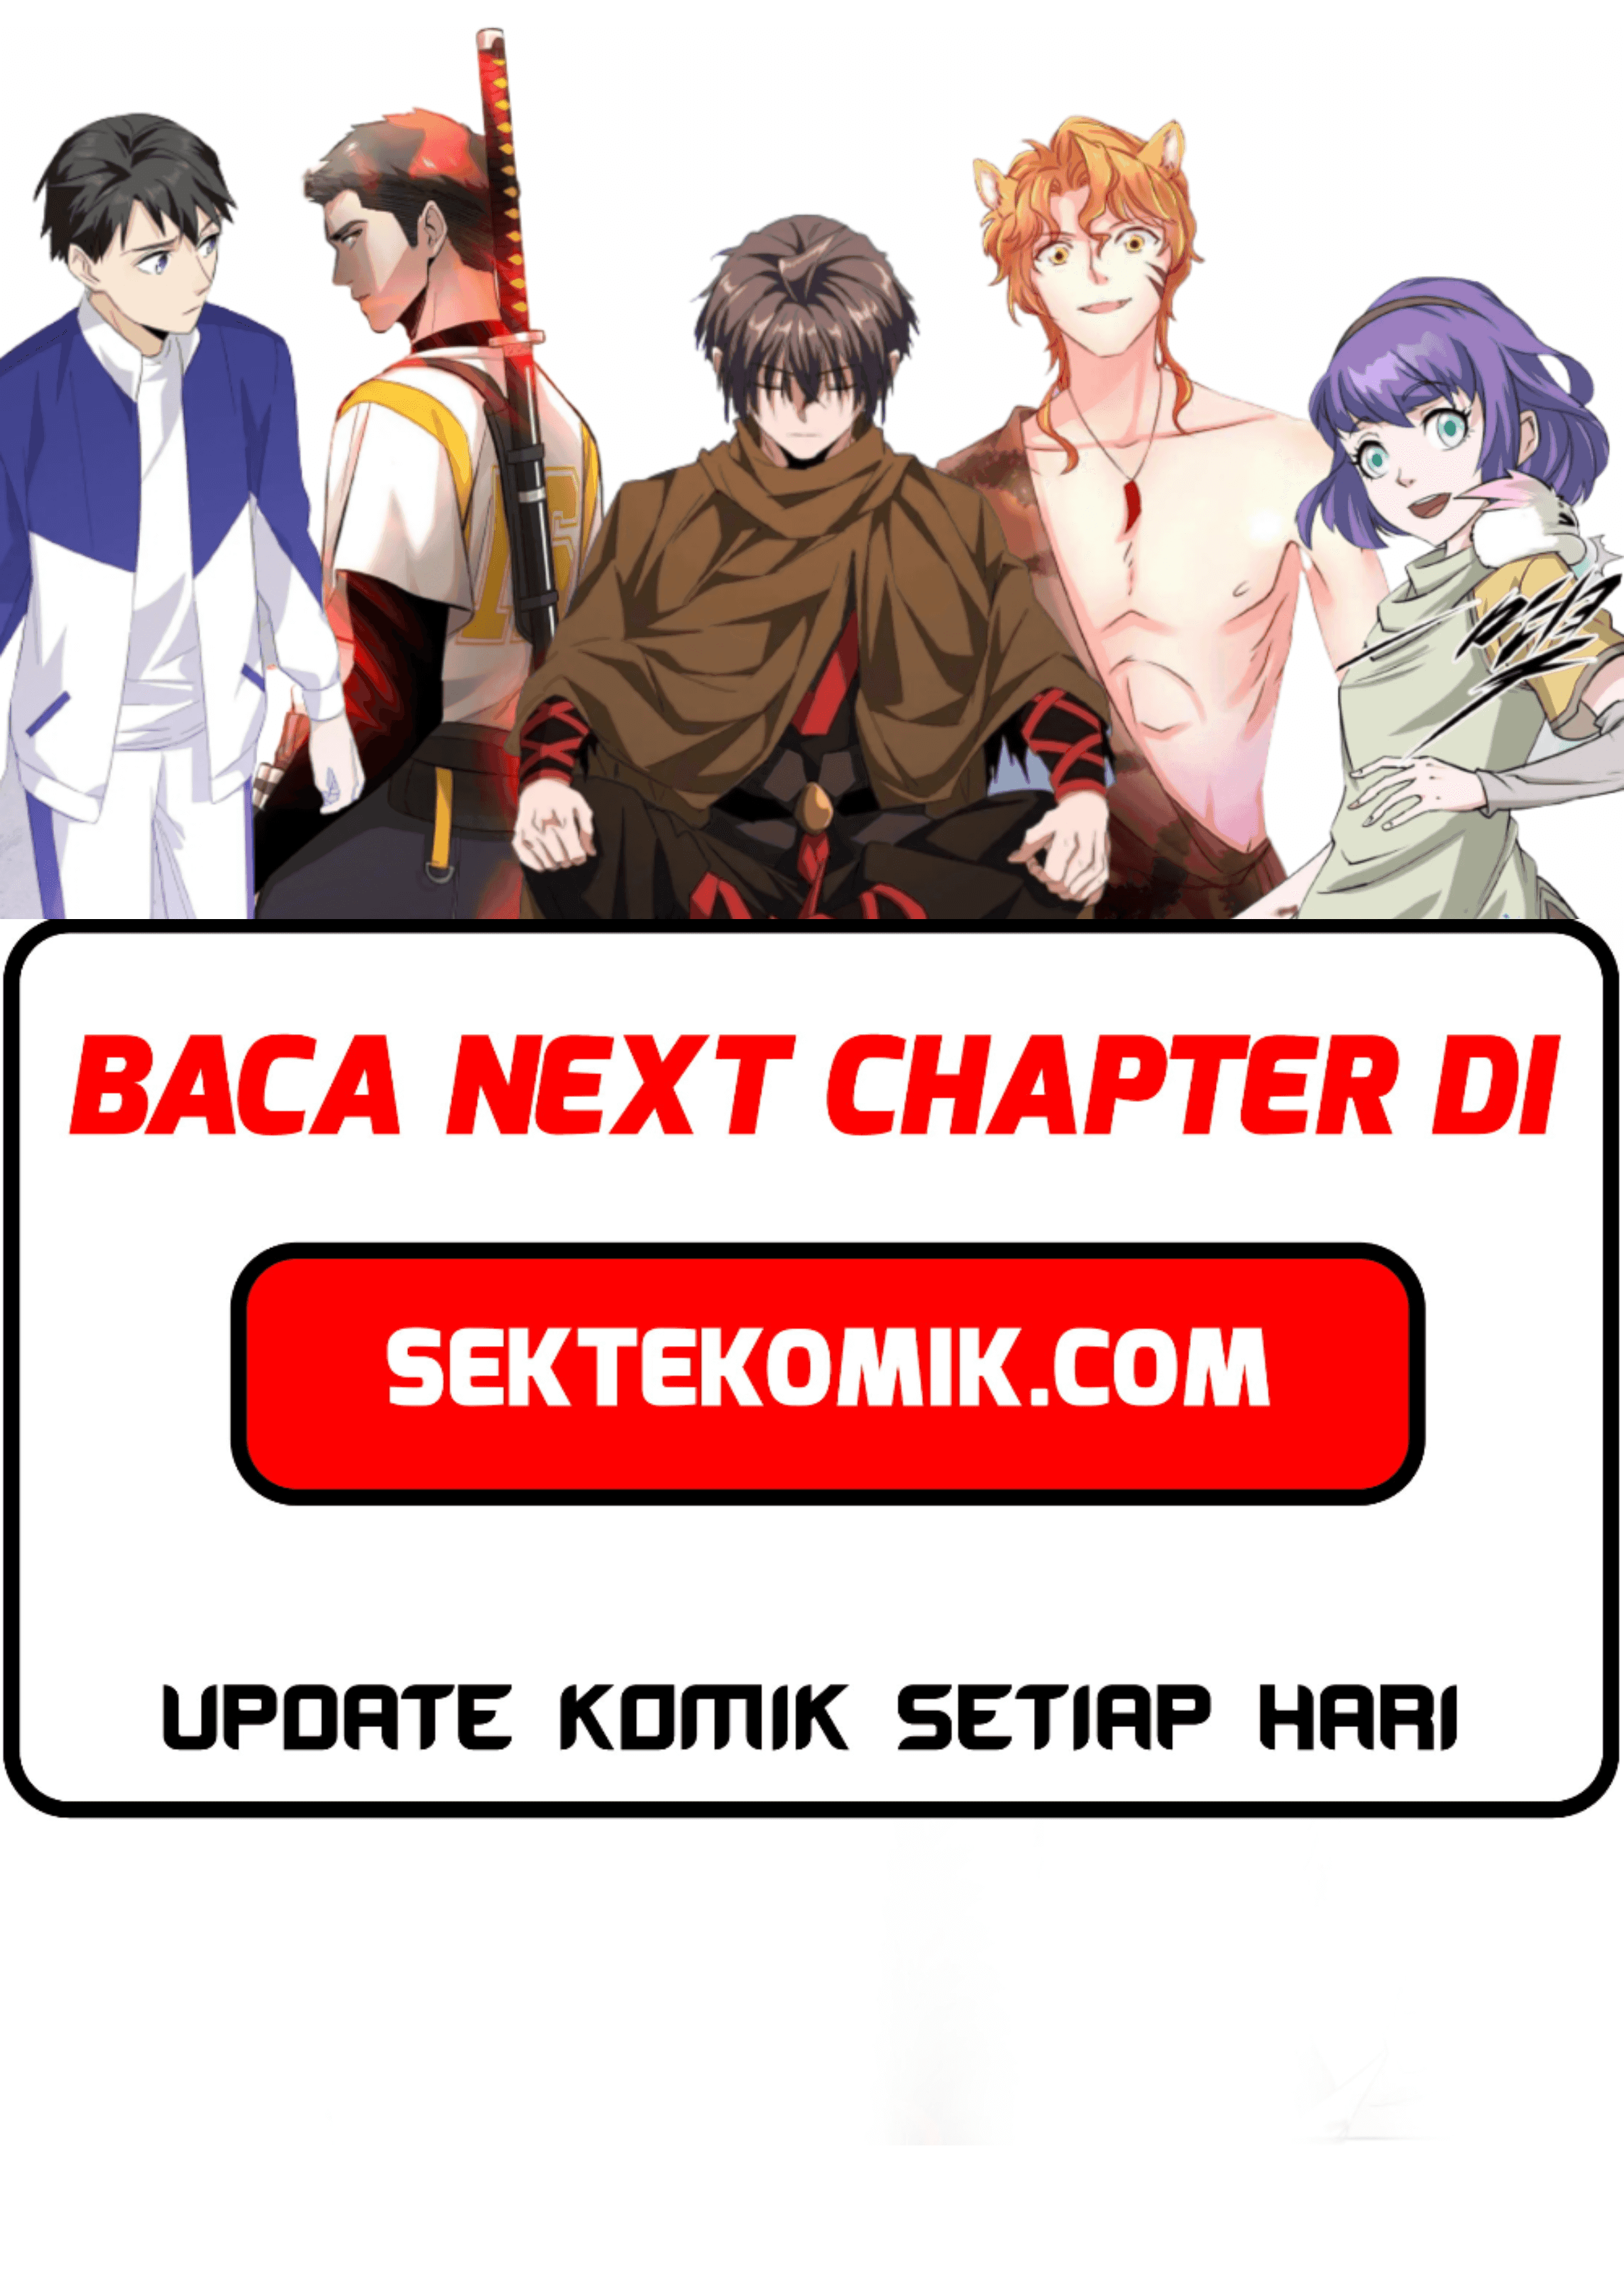 The Descent of the Demonic Master Chapter 95